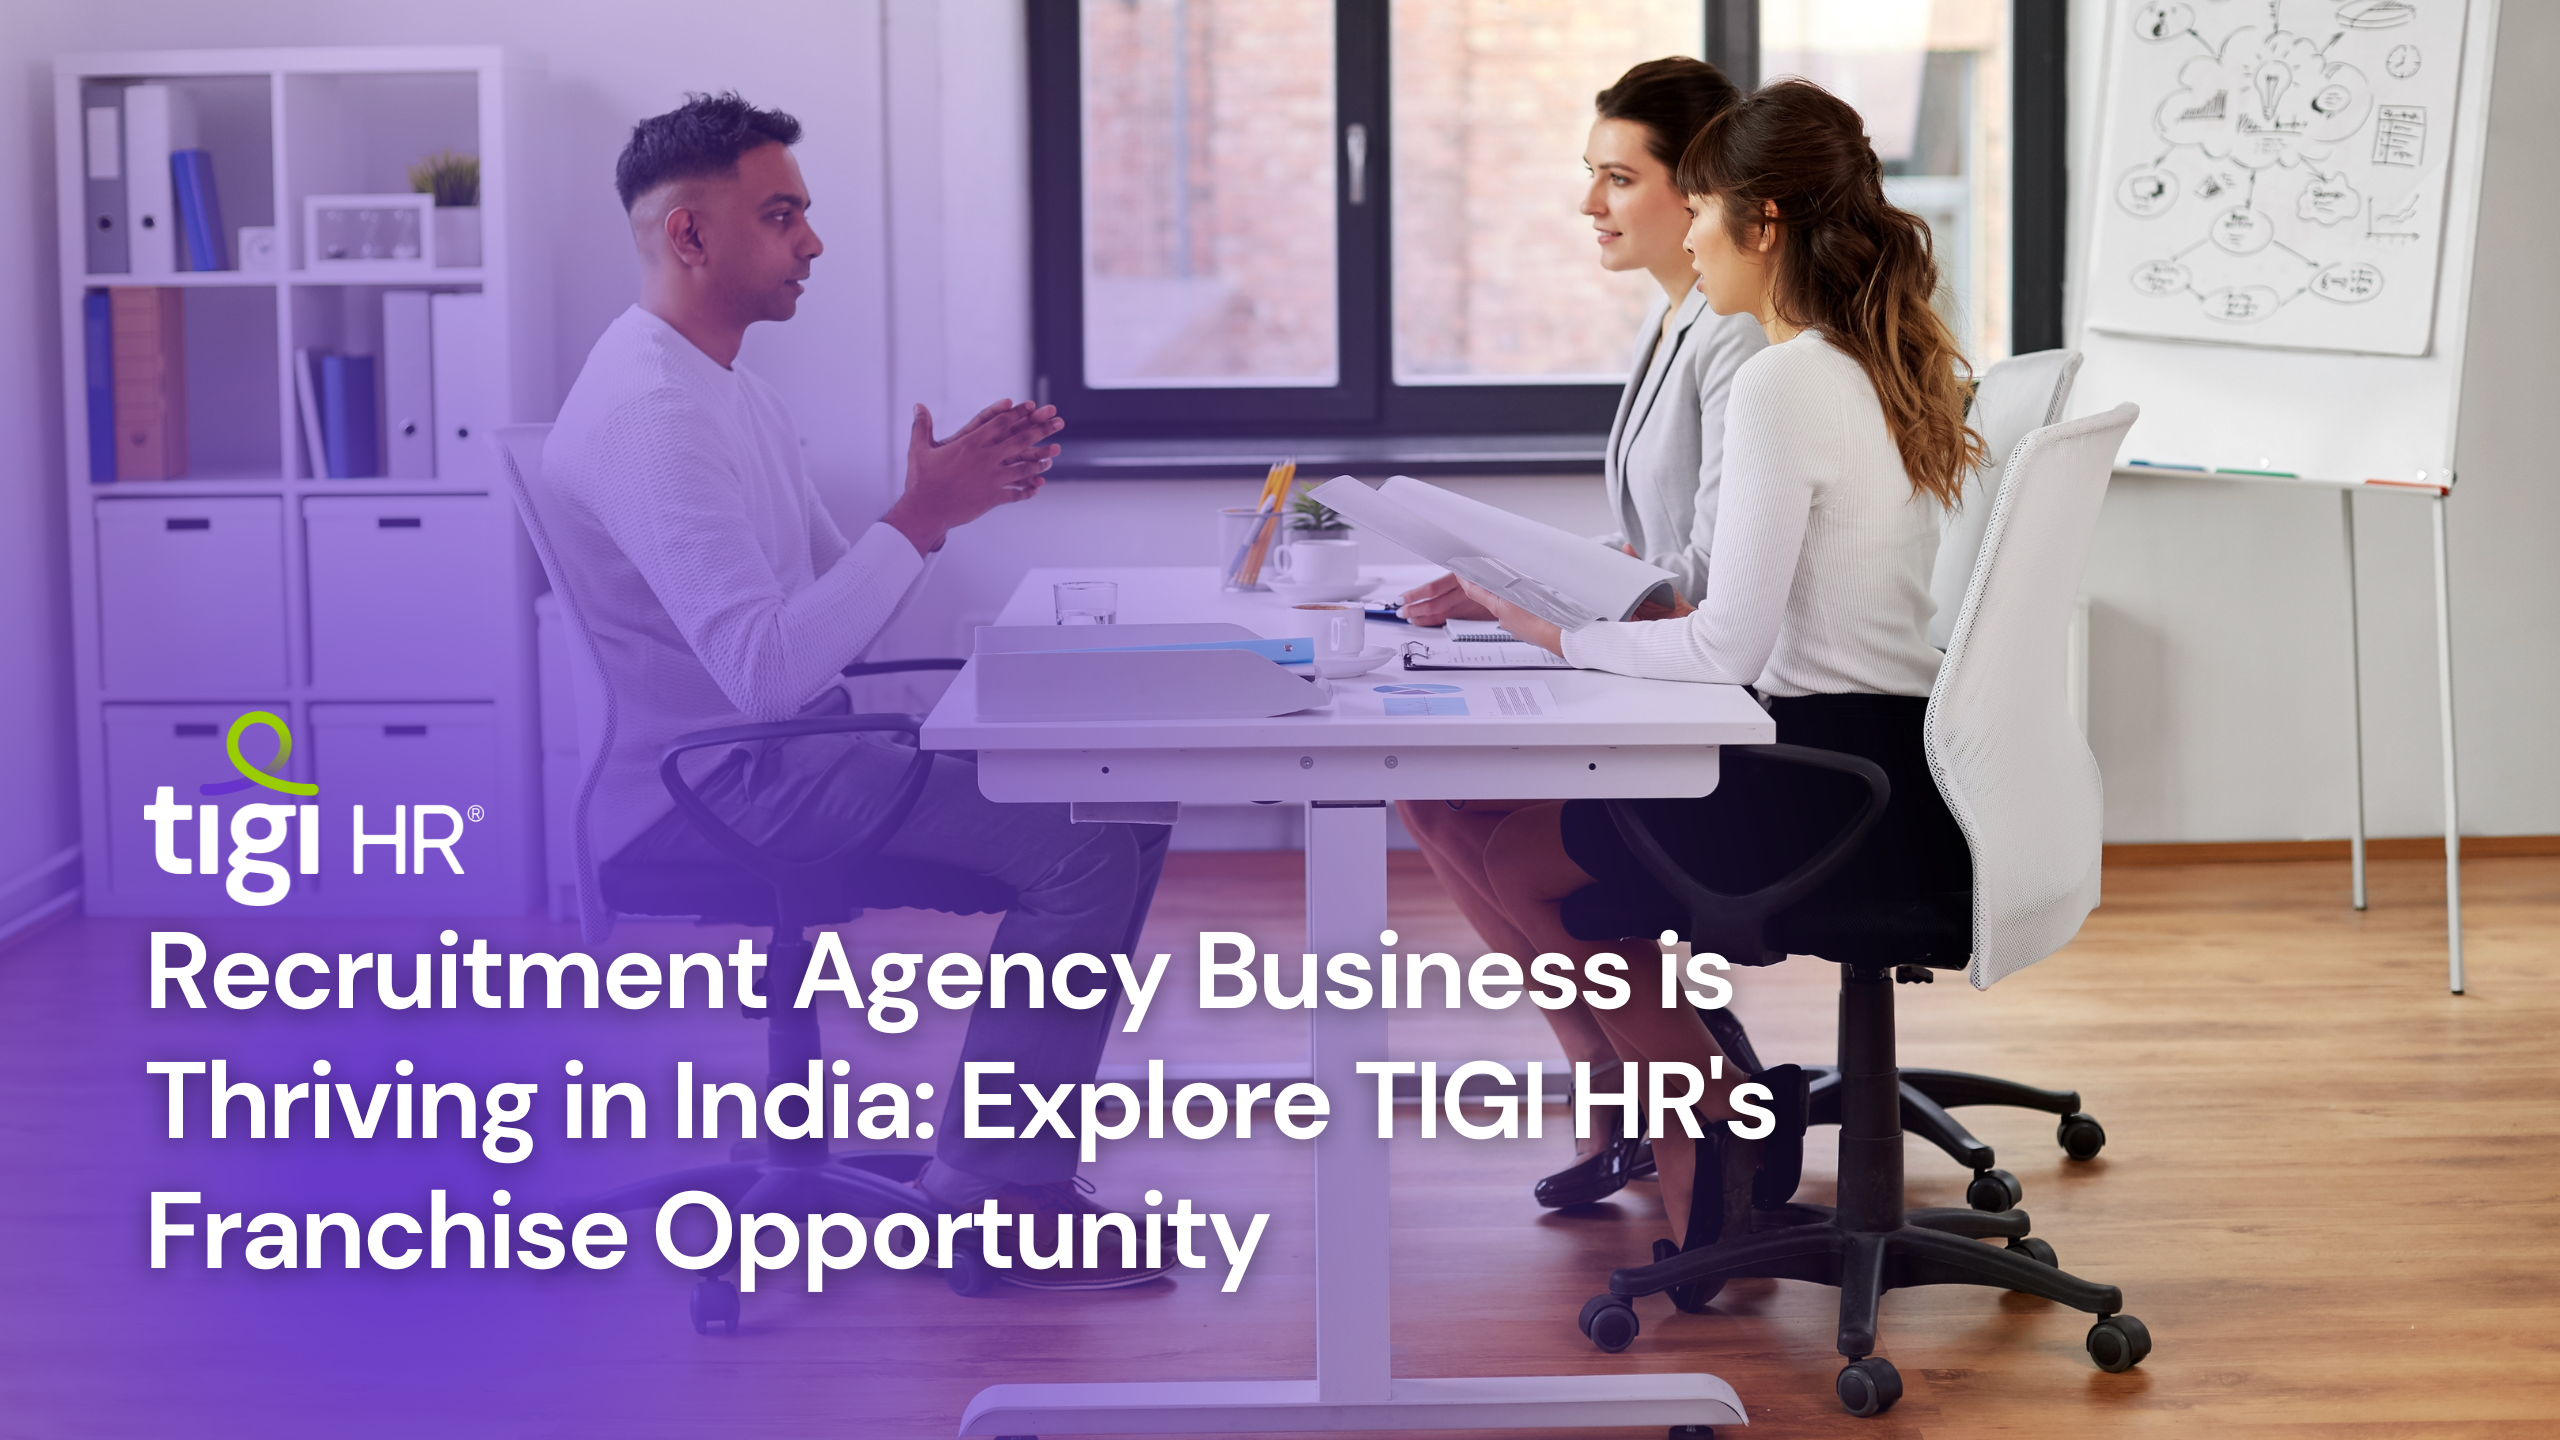 Recruitment Agency Business is Thriving in India: Explore TIGI HR's Franchise Opportunity